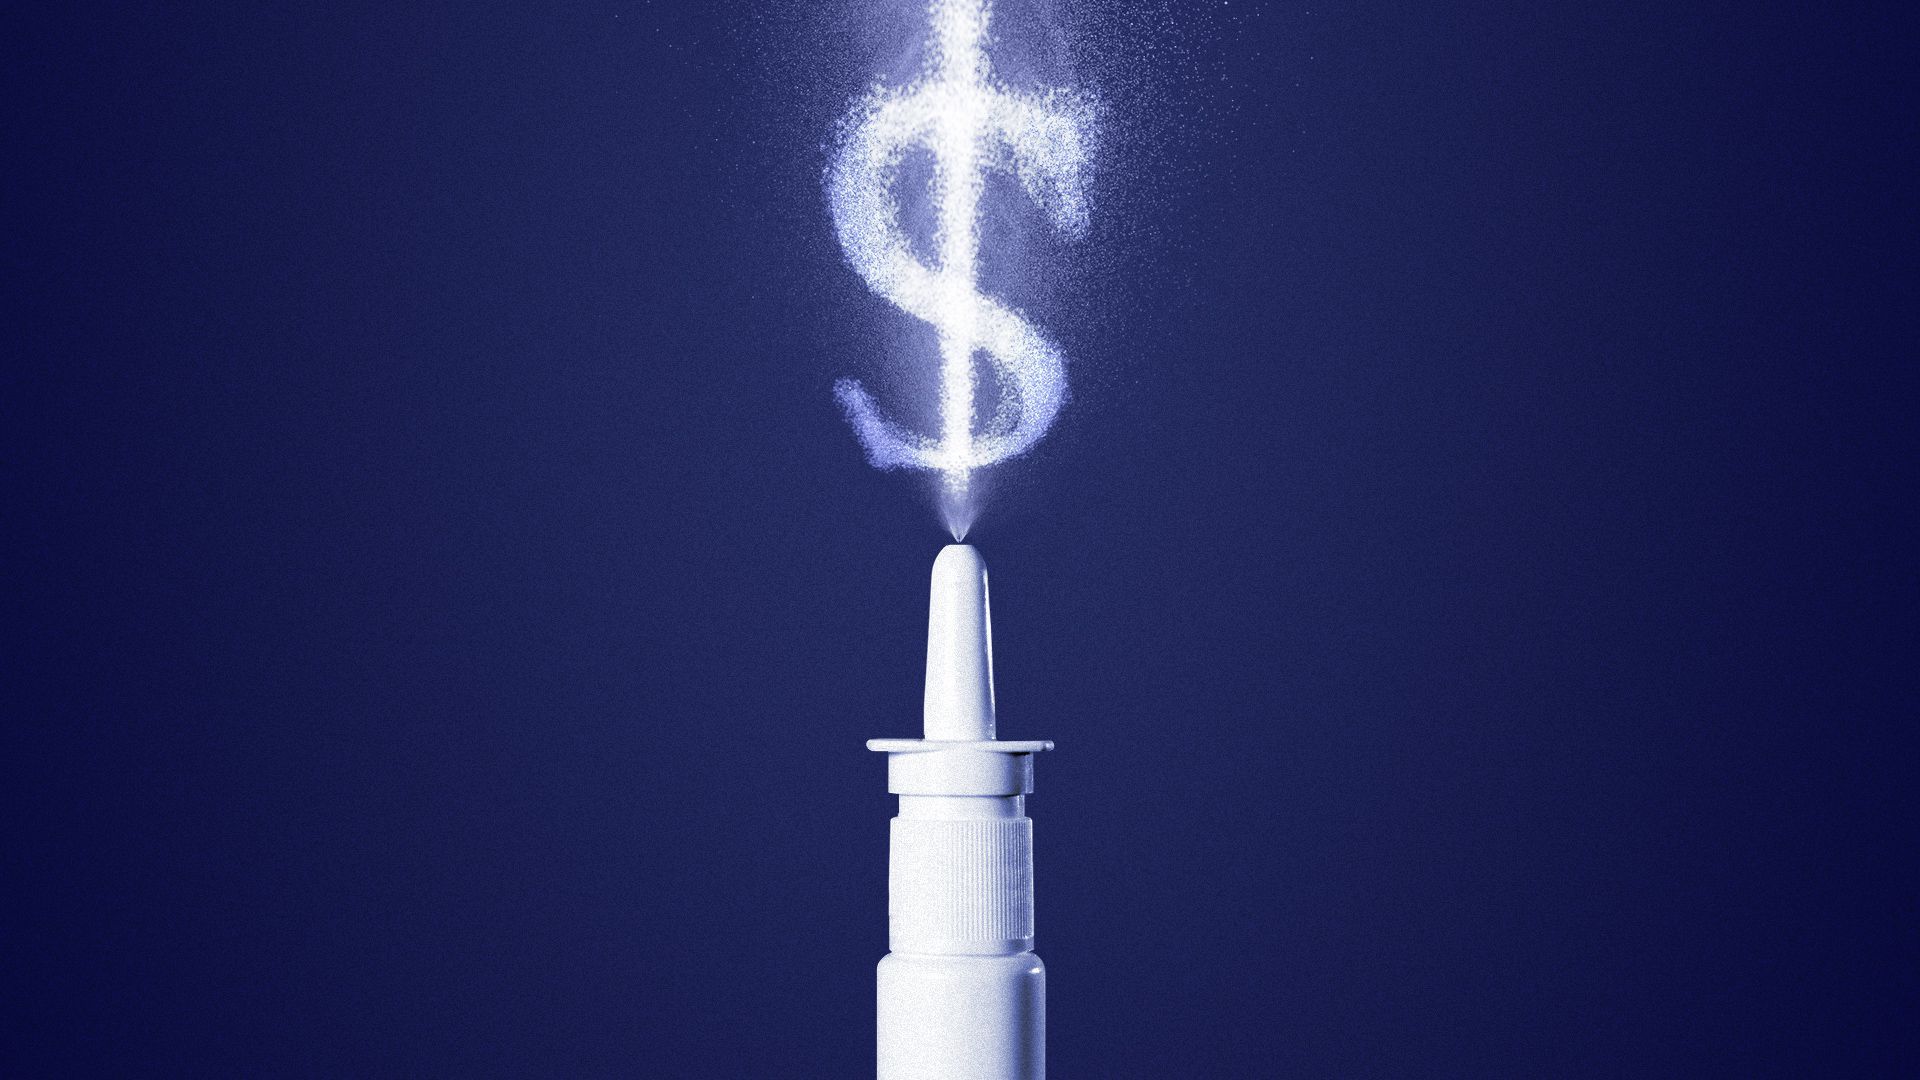 Illustration of a bottle of nasal spray spraying the shape of a dollar sign.